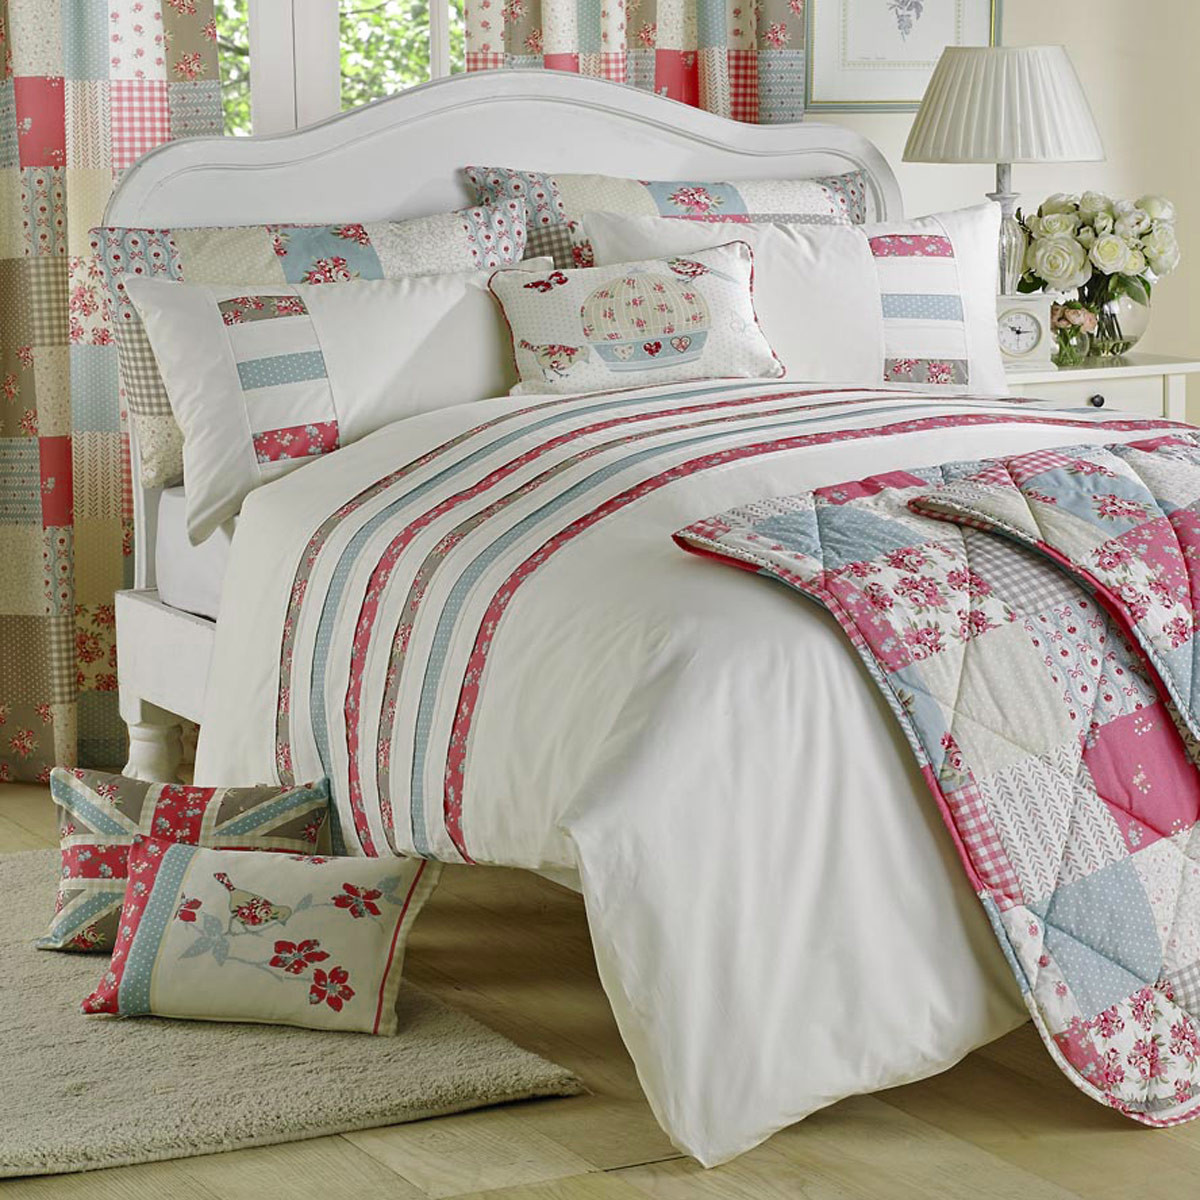 Best ideas about Shabby Chic Duvet
. Save or Pin Petticoat Shabby Chic Floral Design Duvet Set Multi Now.